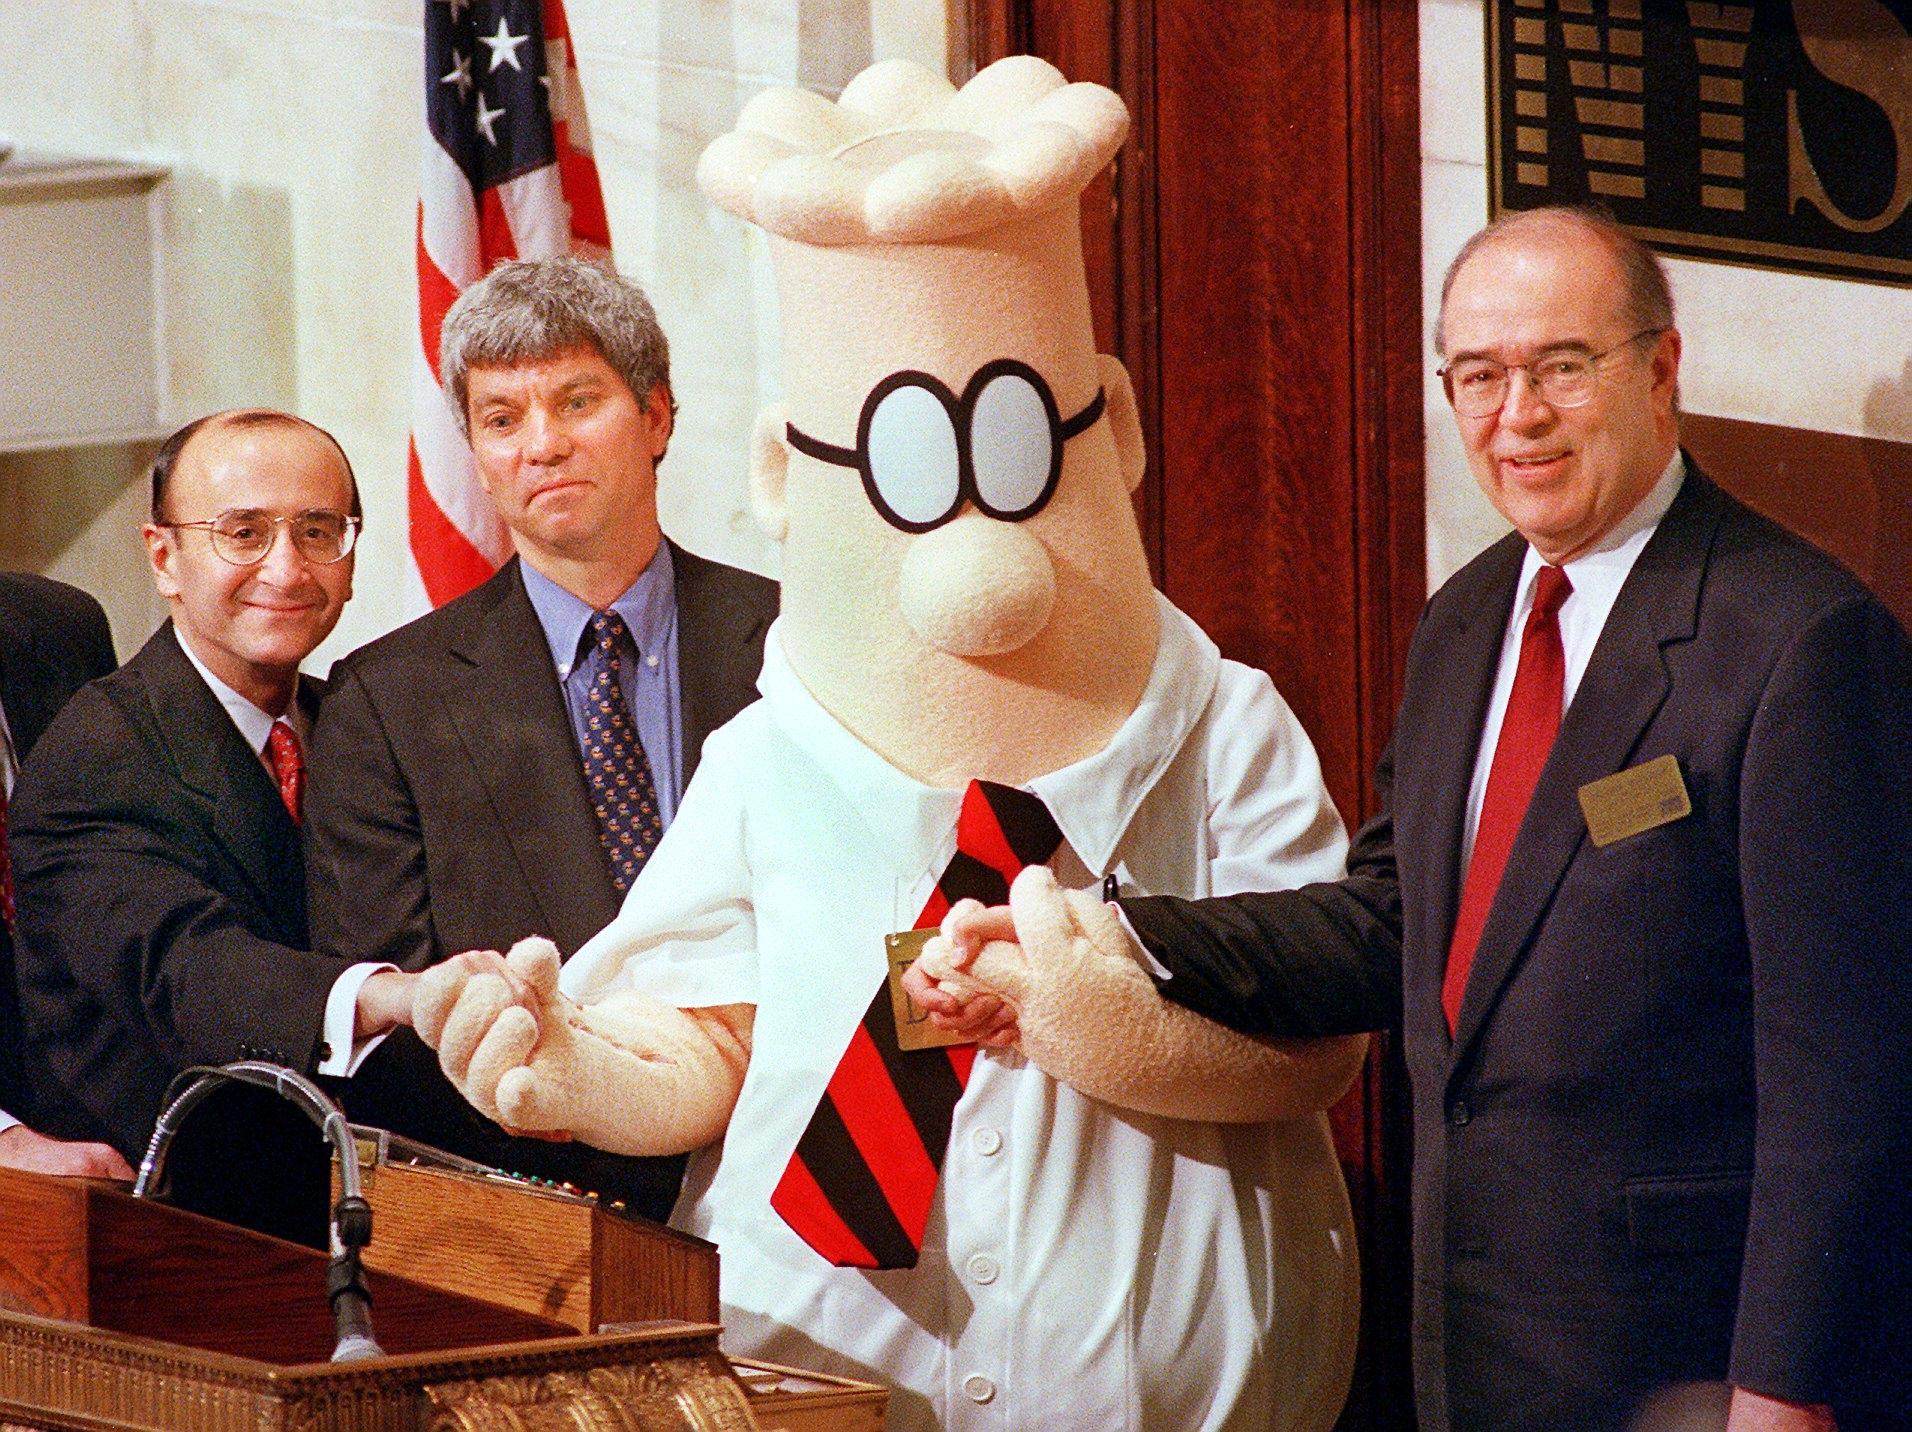 NEW YORK, UNITED STATES:  Dilbert, the comic strip character struggling to make his way up the corporate ladder, is joined by William Burleigh (R), President and Chief Executive Officer of the E.W. Scripps Company, Douglas Stern (2nd from L), Pres. and CEO of United Media, and Richard Grasso (L), Chairman of the New York Stock Exchange, to ring the opening bell as part of the activities to promote the launch of Dilbert's new television show 25 January.   AFP PHOTOS/Henny Ray ABRAMS (Photo credit should read HENNY RAY ABRAMS/AFP via Getty Images)